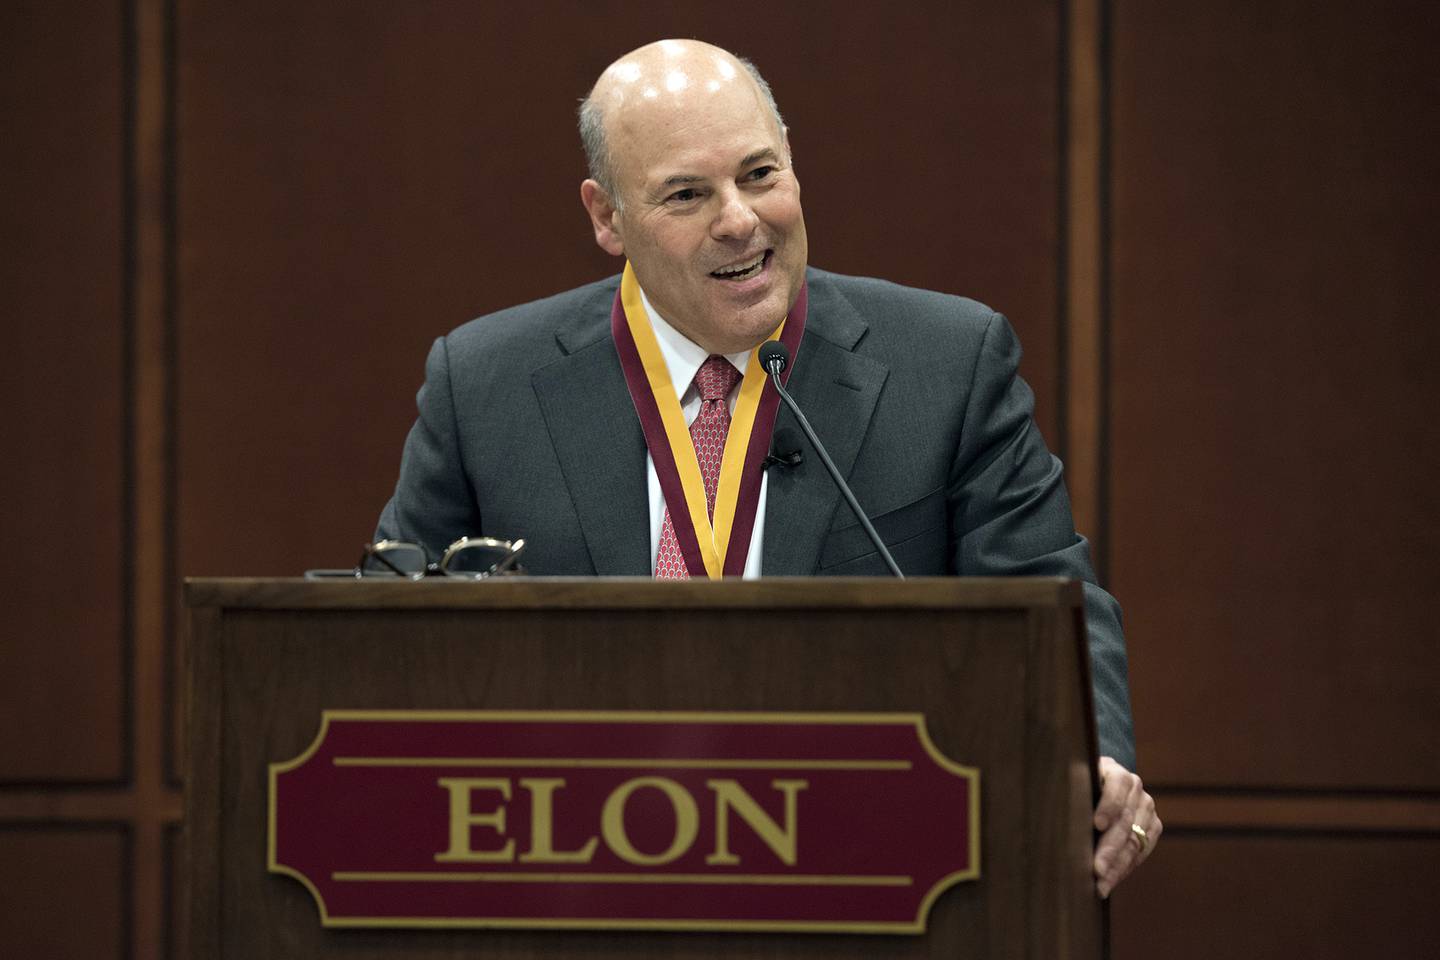 In this March 1, 2017, file photo, Elon Trustee Louis DeJoy is honored with Elon's Medal for Entrepreneurial Leadership in Elon, N.C.